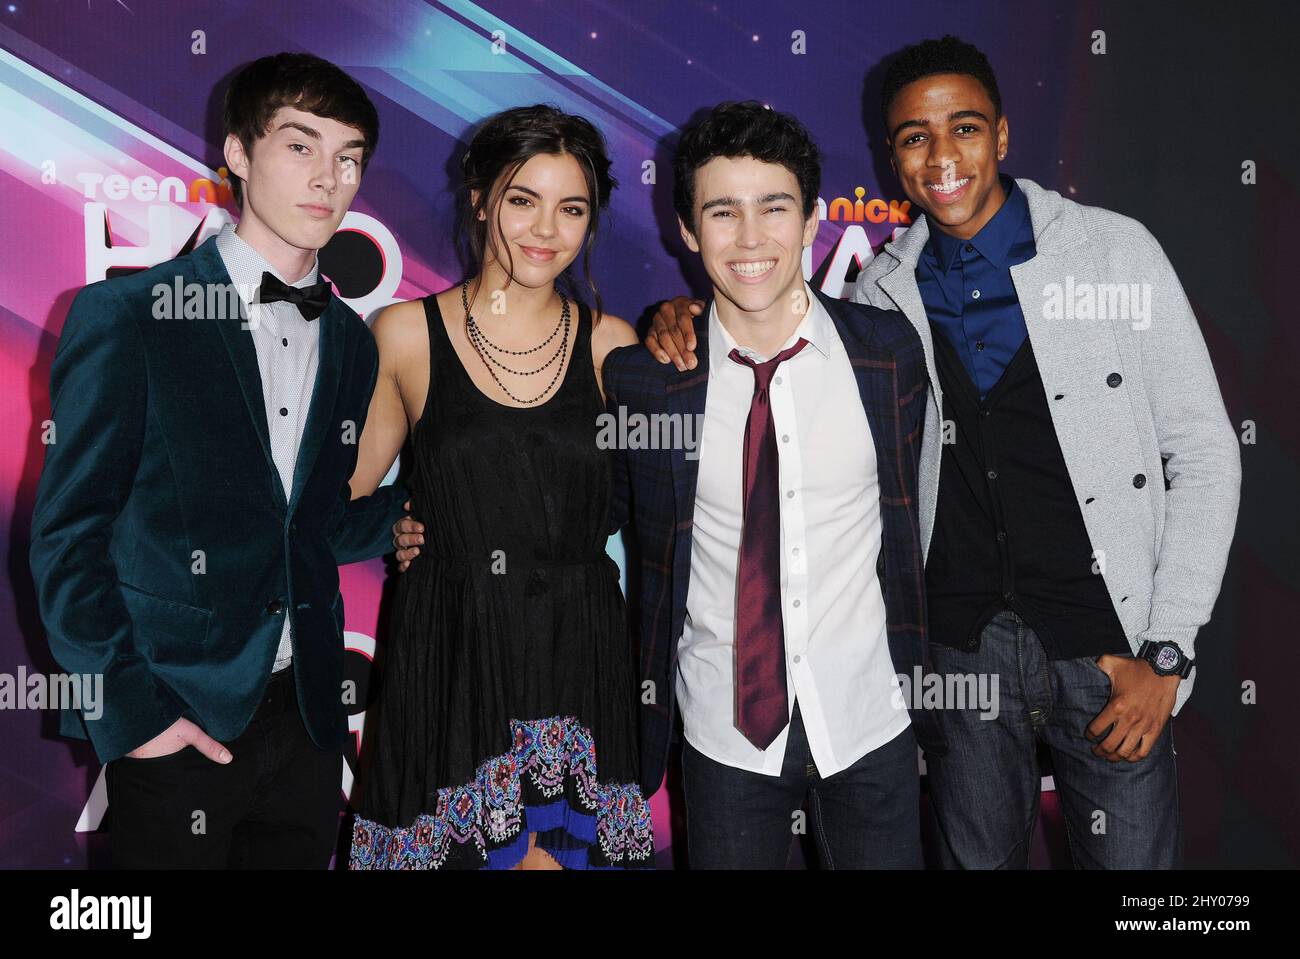 Noah Crawford, Samantha Boscarino, Max Schneider and Christopher O'Neal arriving at the 2012 Halo Awards at the Hollywood Palladium in Los Angeles. Stock Photo